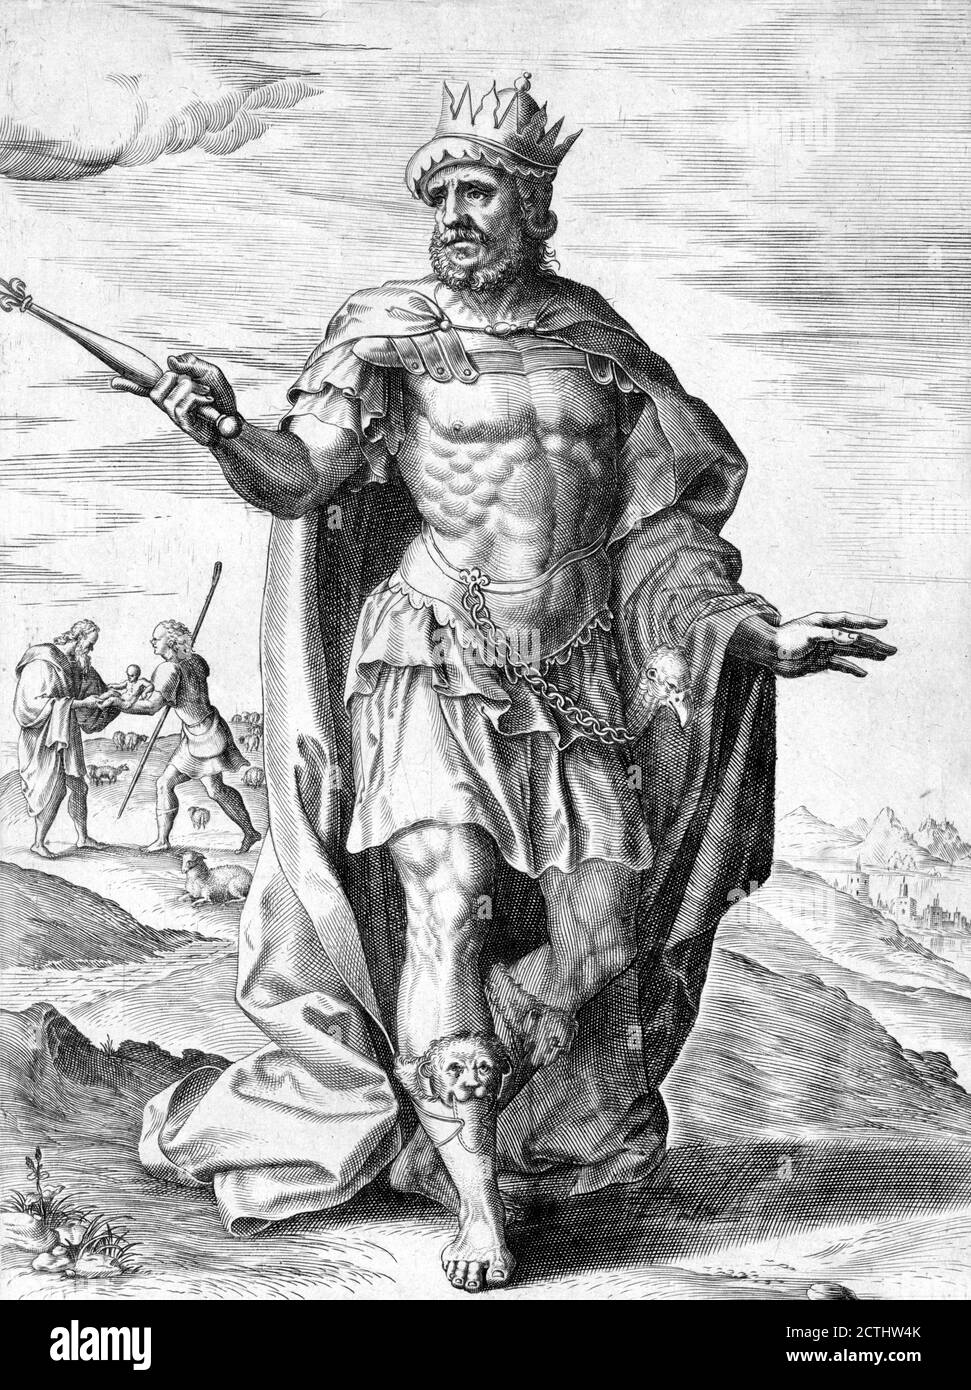 Cyrus the Great, late 16th century Dutch engraving Stock Photo